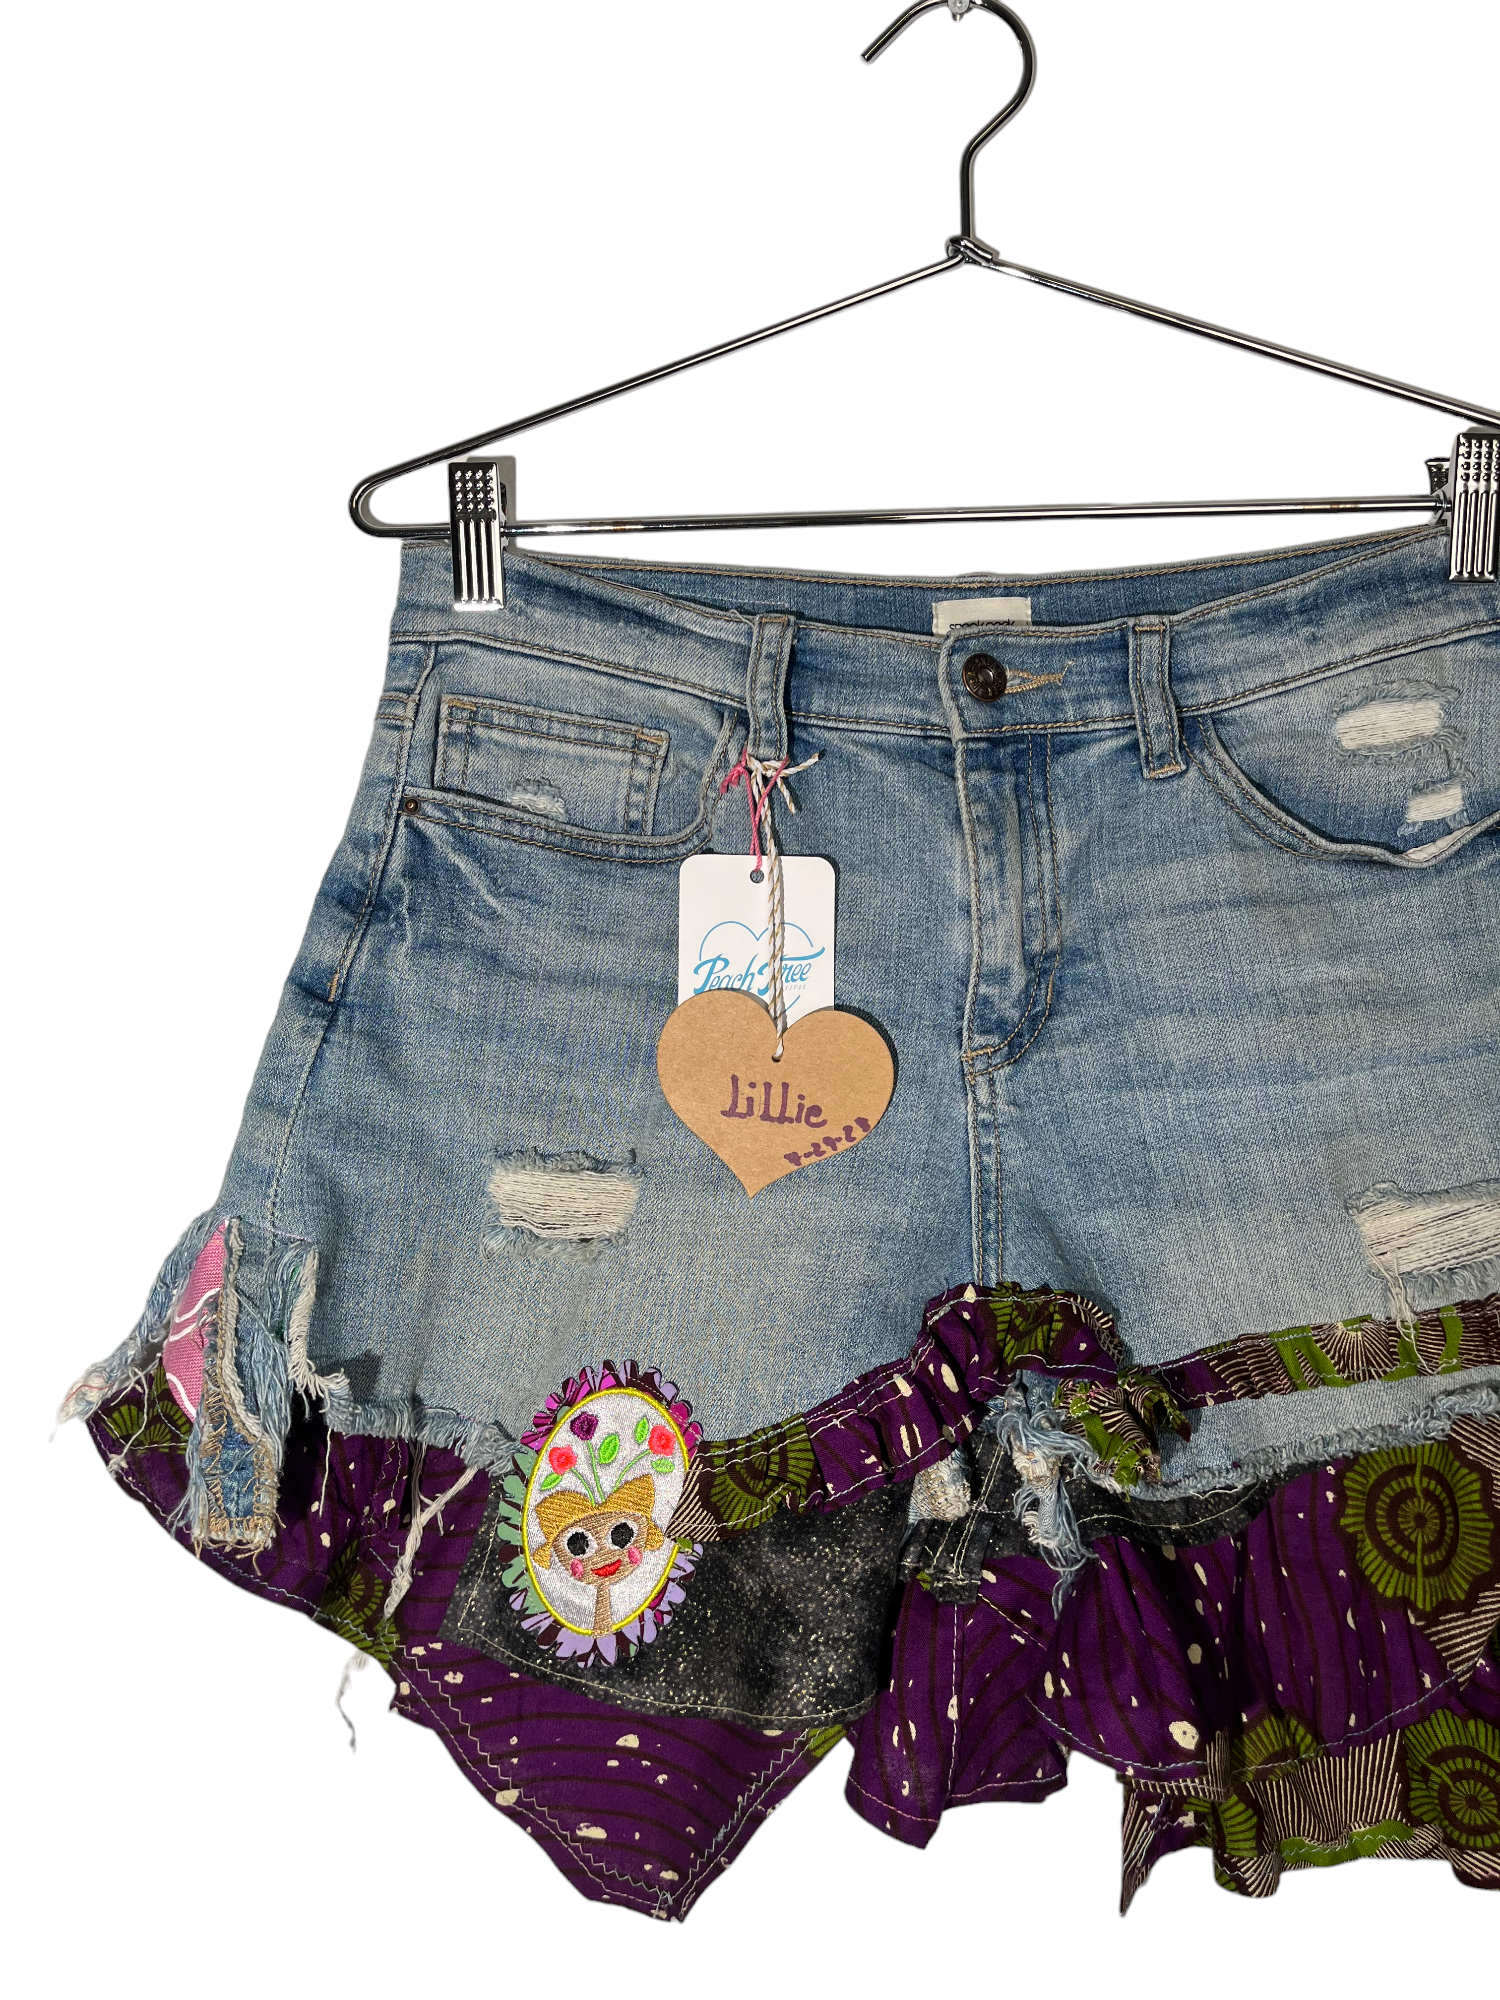 By Mechis "Lillie" Denim Skirt with Scrap Fabric Design